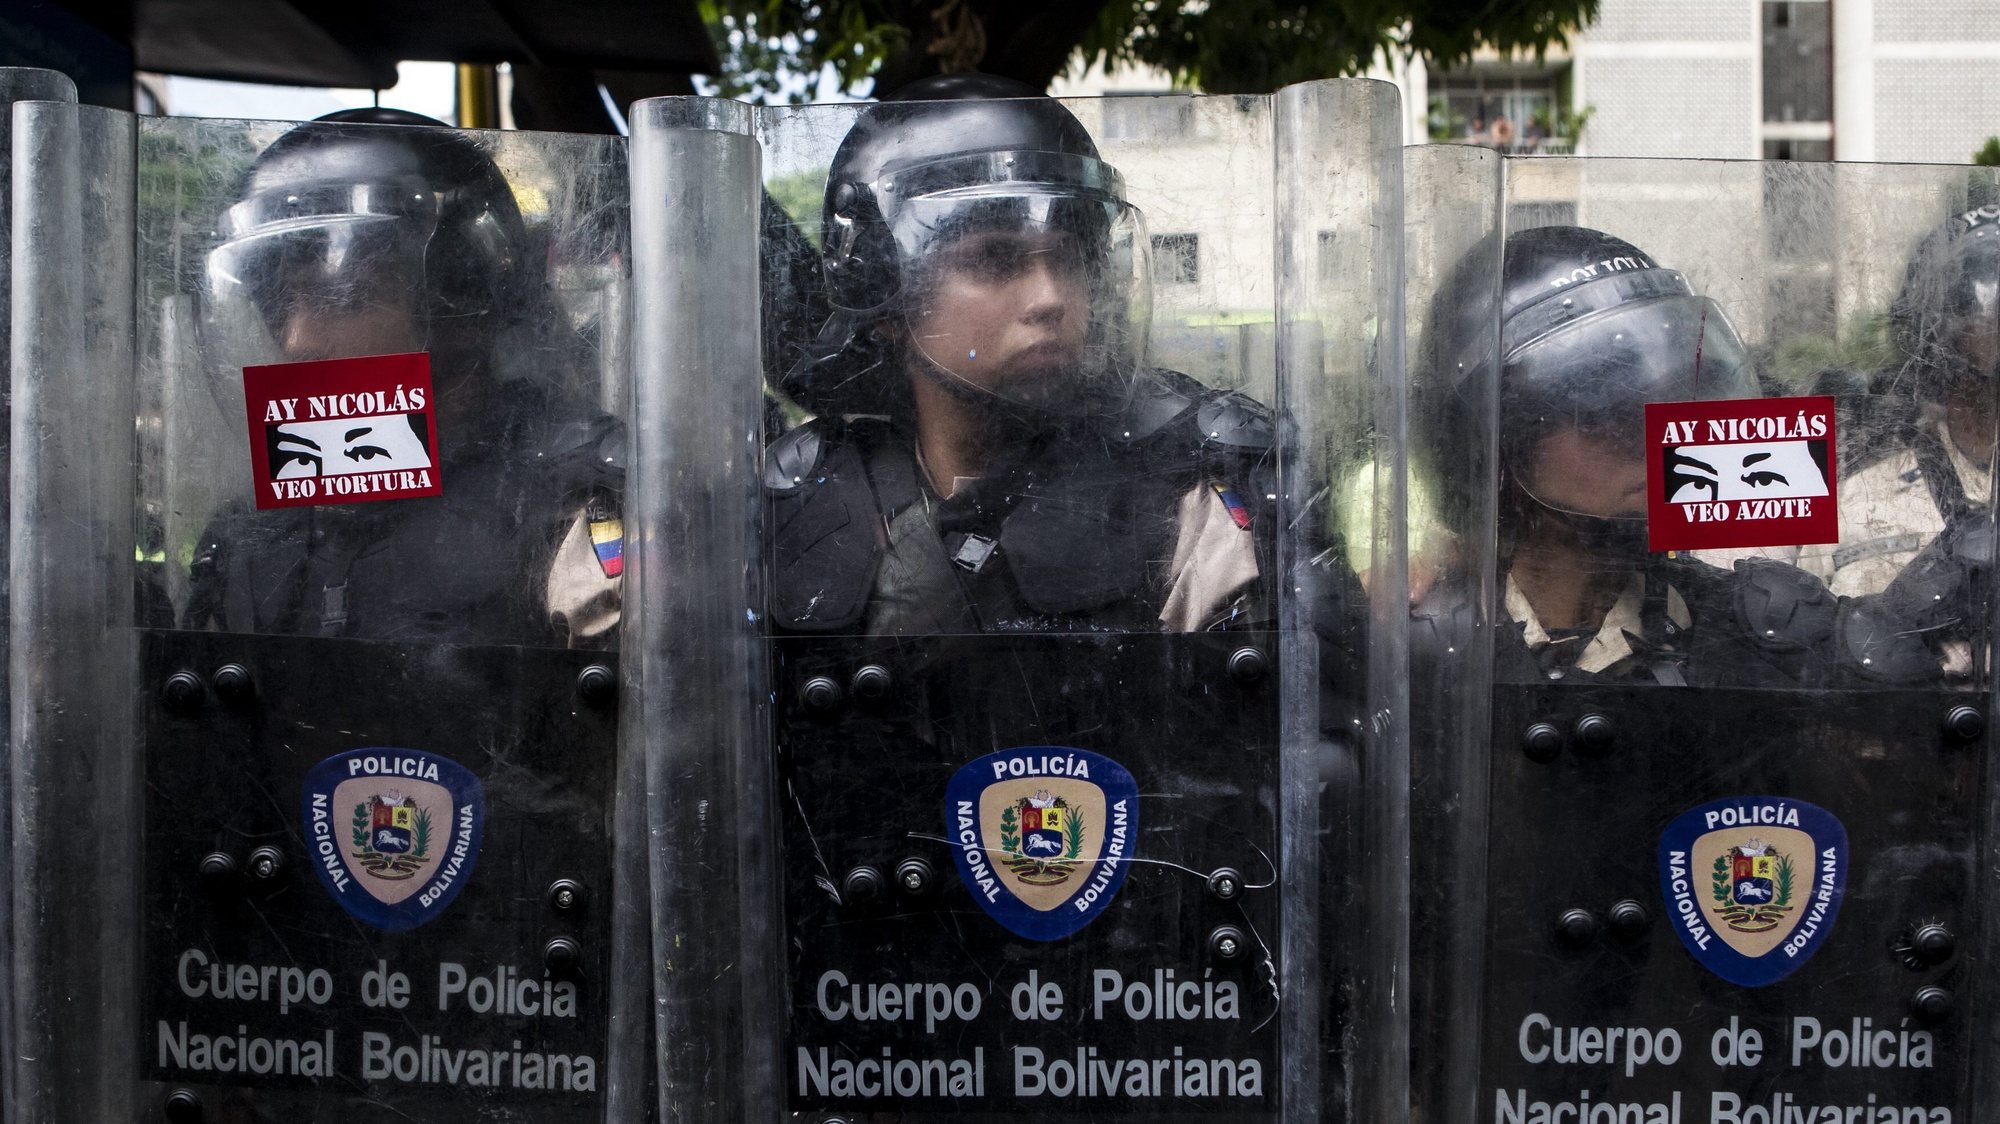 epa04203137 Members of the Policia Nacional Bolivariana have protest stickers reading &#039;Oh Nicolas, I see torture&#039; (L) and &#039;Oh Nicolas, I see whippings&#039; placed on their riot shields during an opposition march in the Las Mercedes area of Caracas, Venezuela, 12 May 2014. Authorities in Venezuela blocked an opposition march as members of the student opposition movement called for new protests asking for detained protestors to be freed. Protests against the government of President Nicolas Maduro, which have been ongoing since 12 February, have left at least 42 people dead and more than 700 injured.  EPA/MIGUEL GUTIERREZ